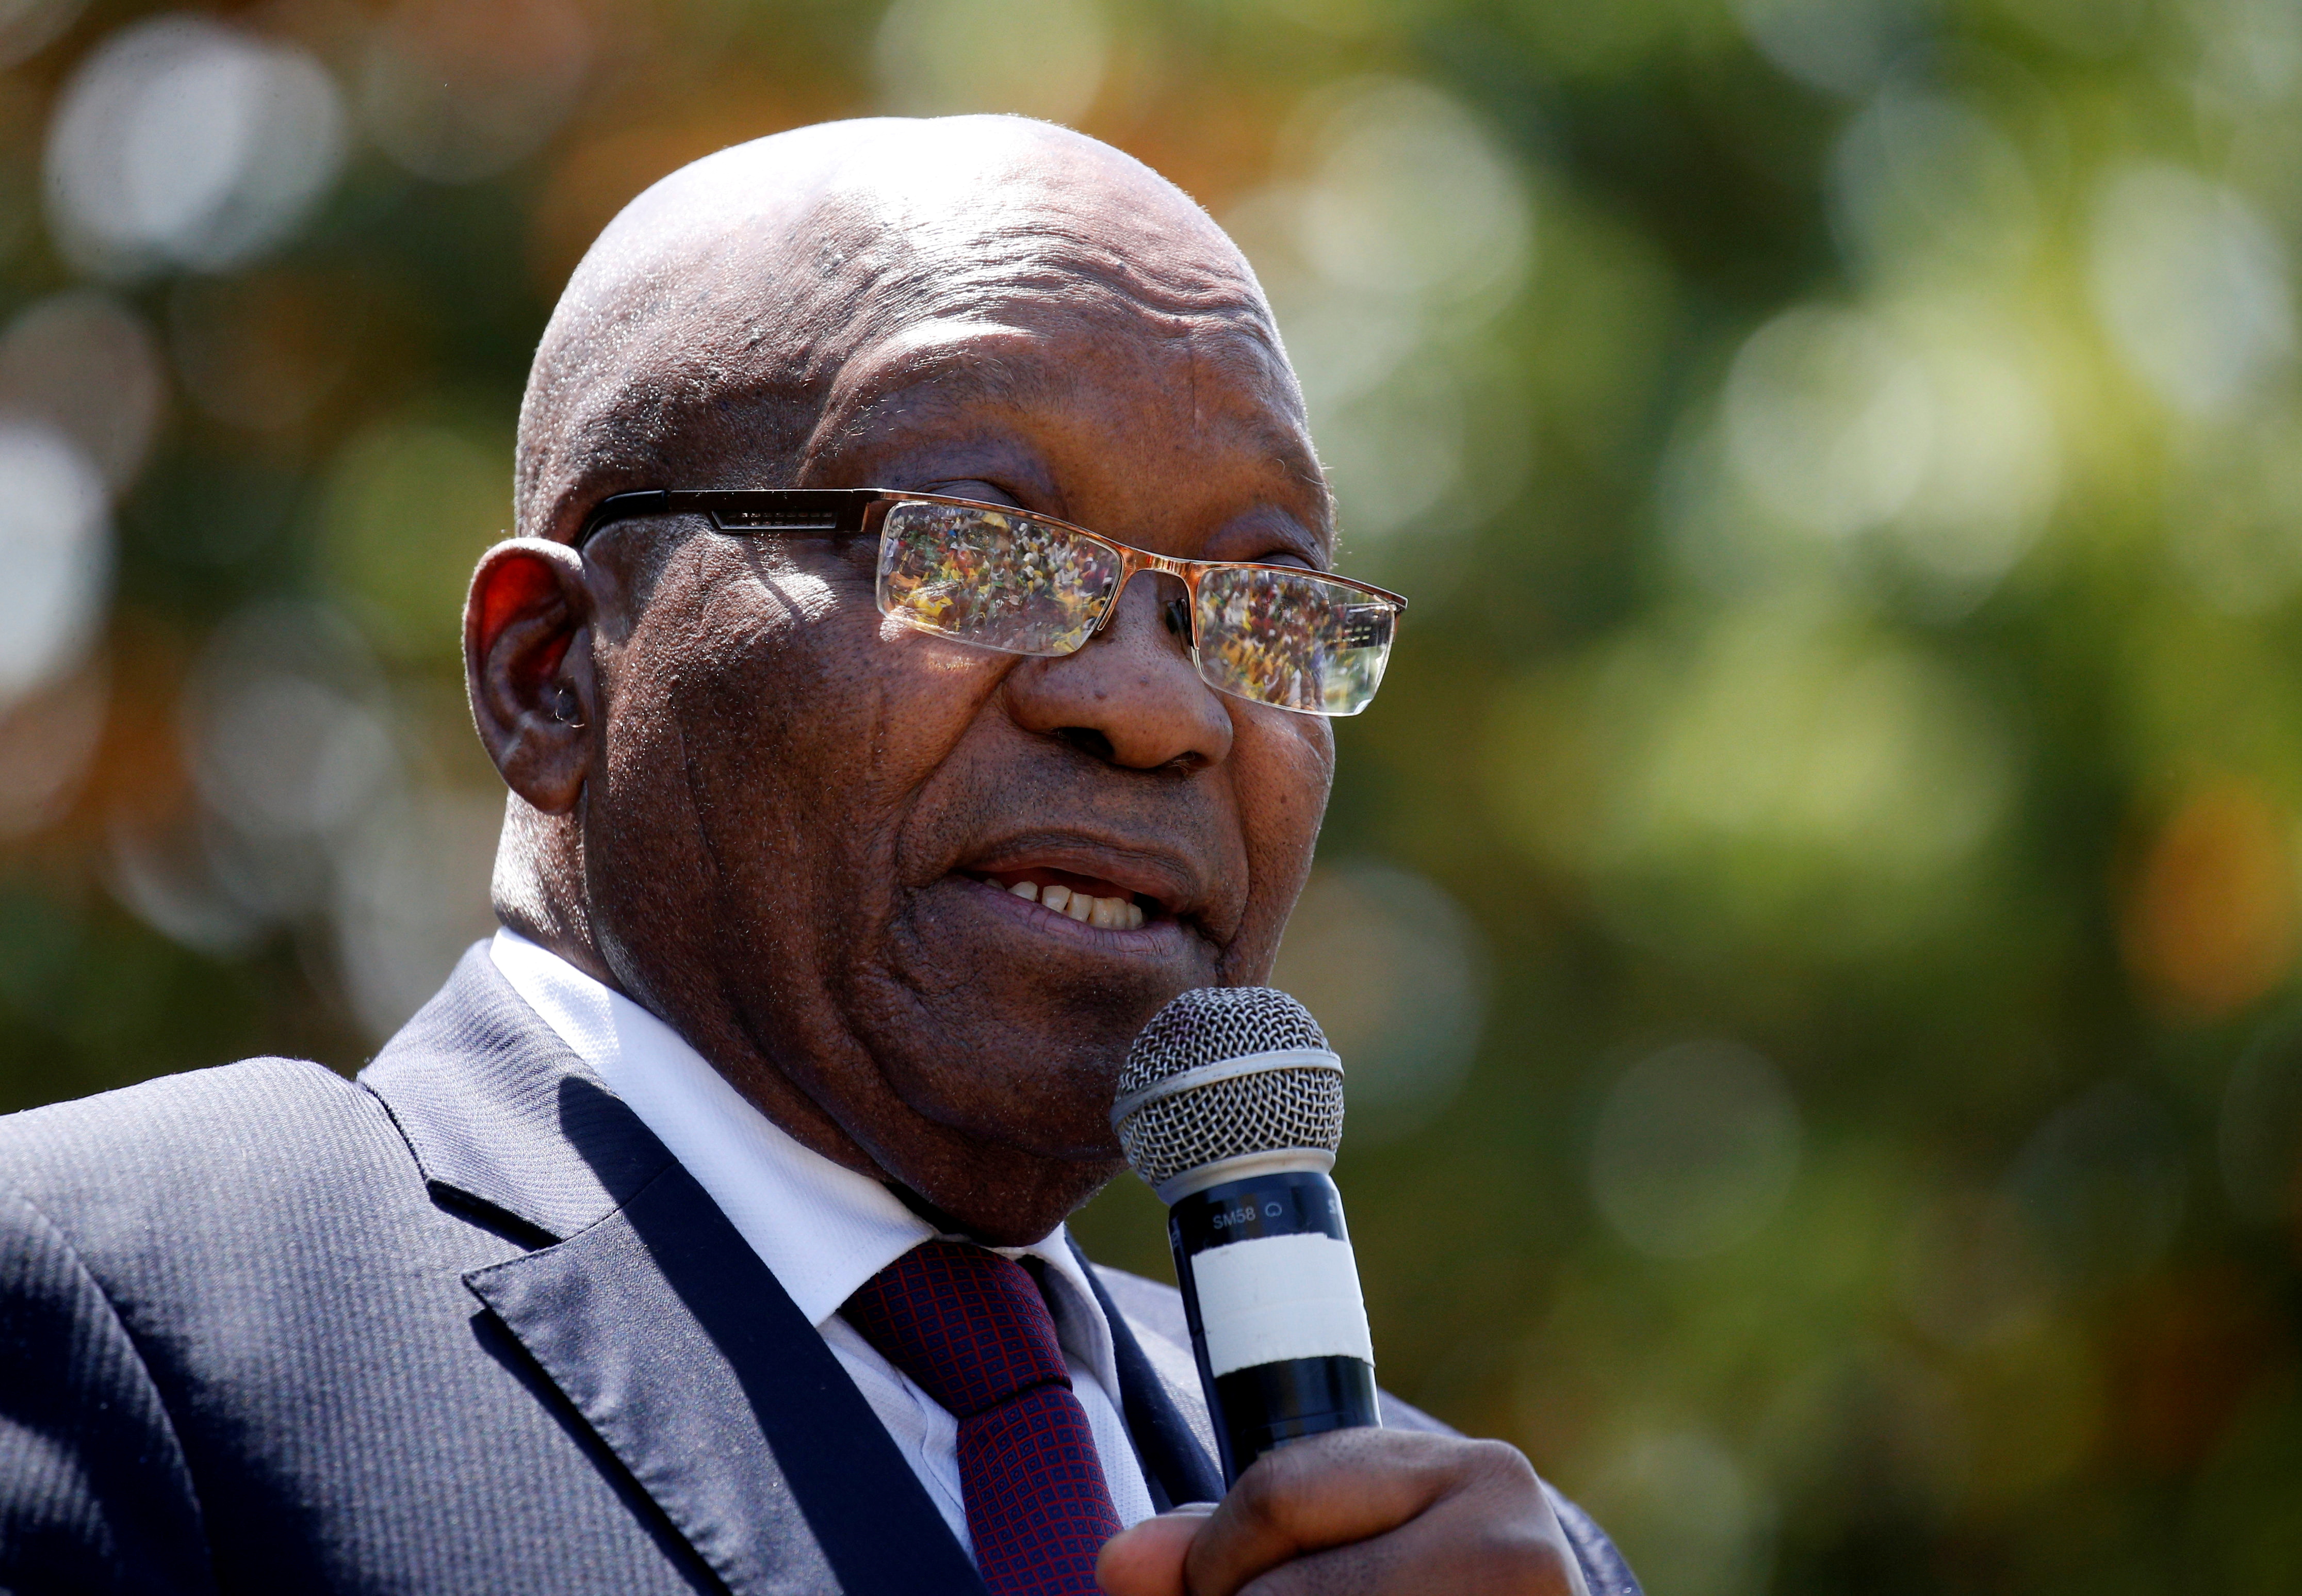 Former South African President Jacob Zuma speaks to supporters after appearing in the High Court where he faces charges that include fraud, corruption and racketeering, in Pietermaritzburg